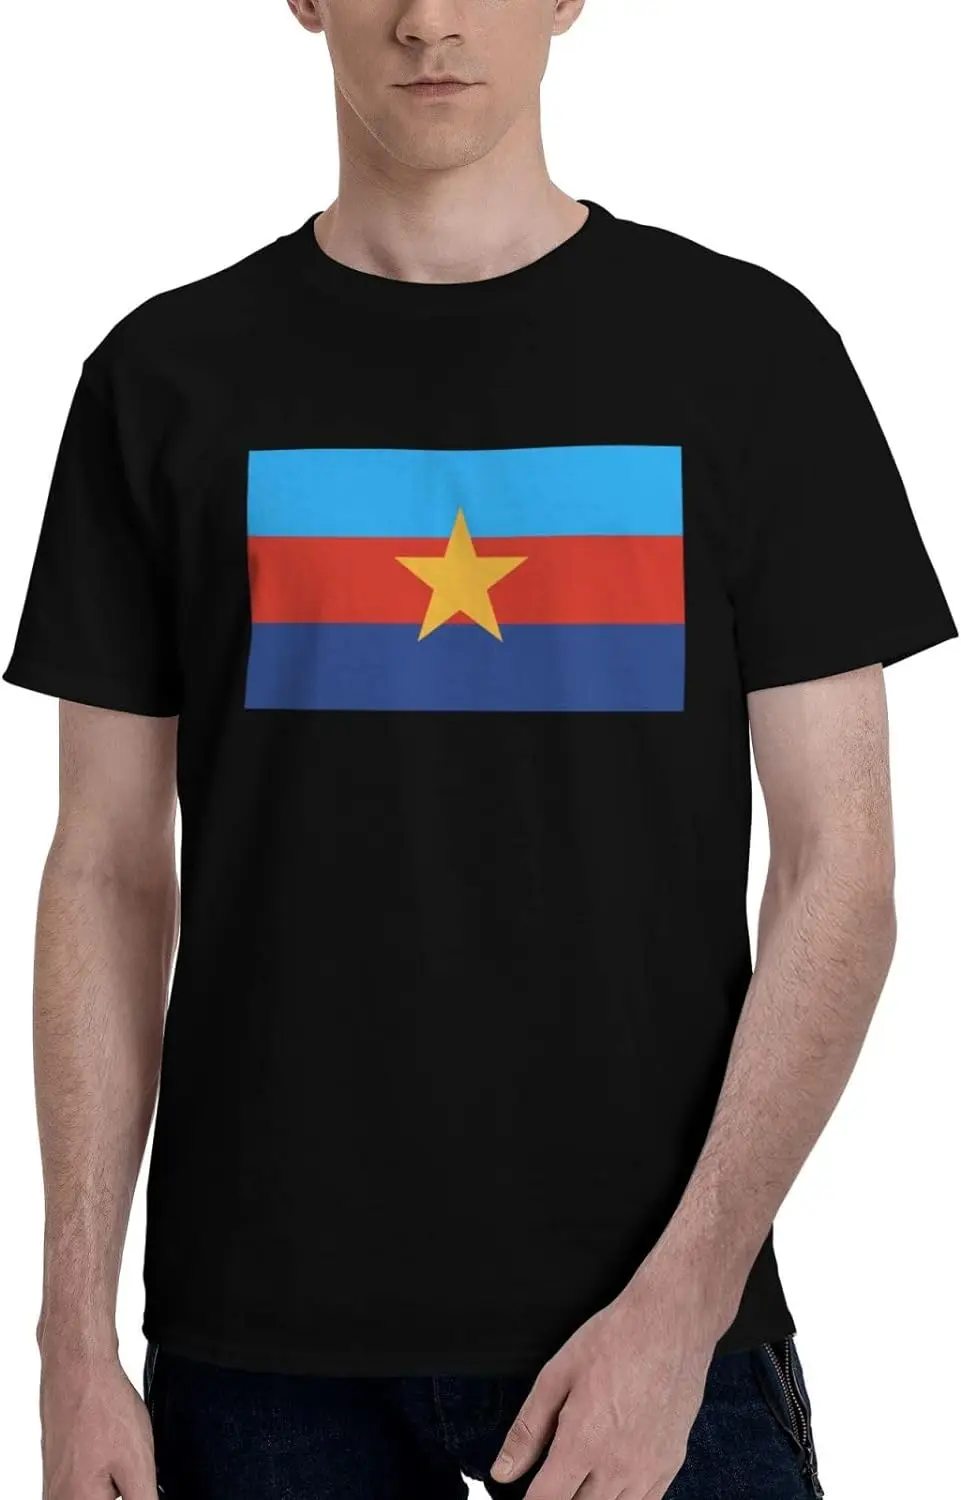 

Commander in Chief Flag of Myanmar 2010 Short Sleeve T-Shirt Cotton Soft Breathable Crew-Neck Black